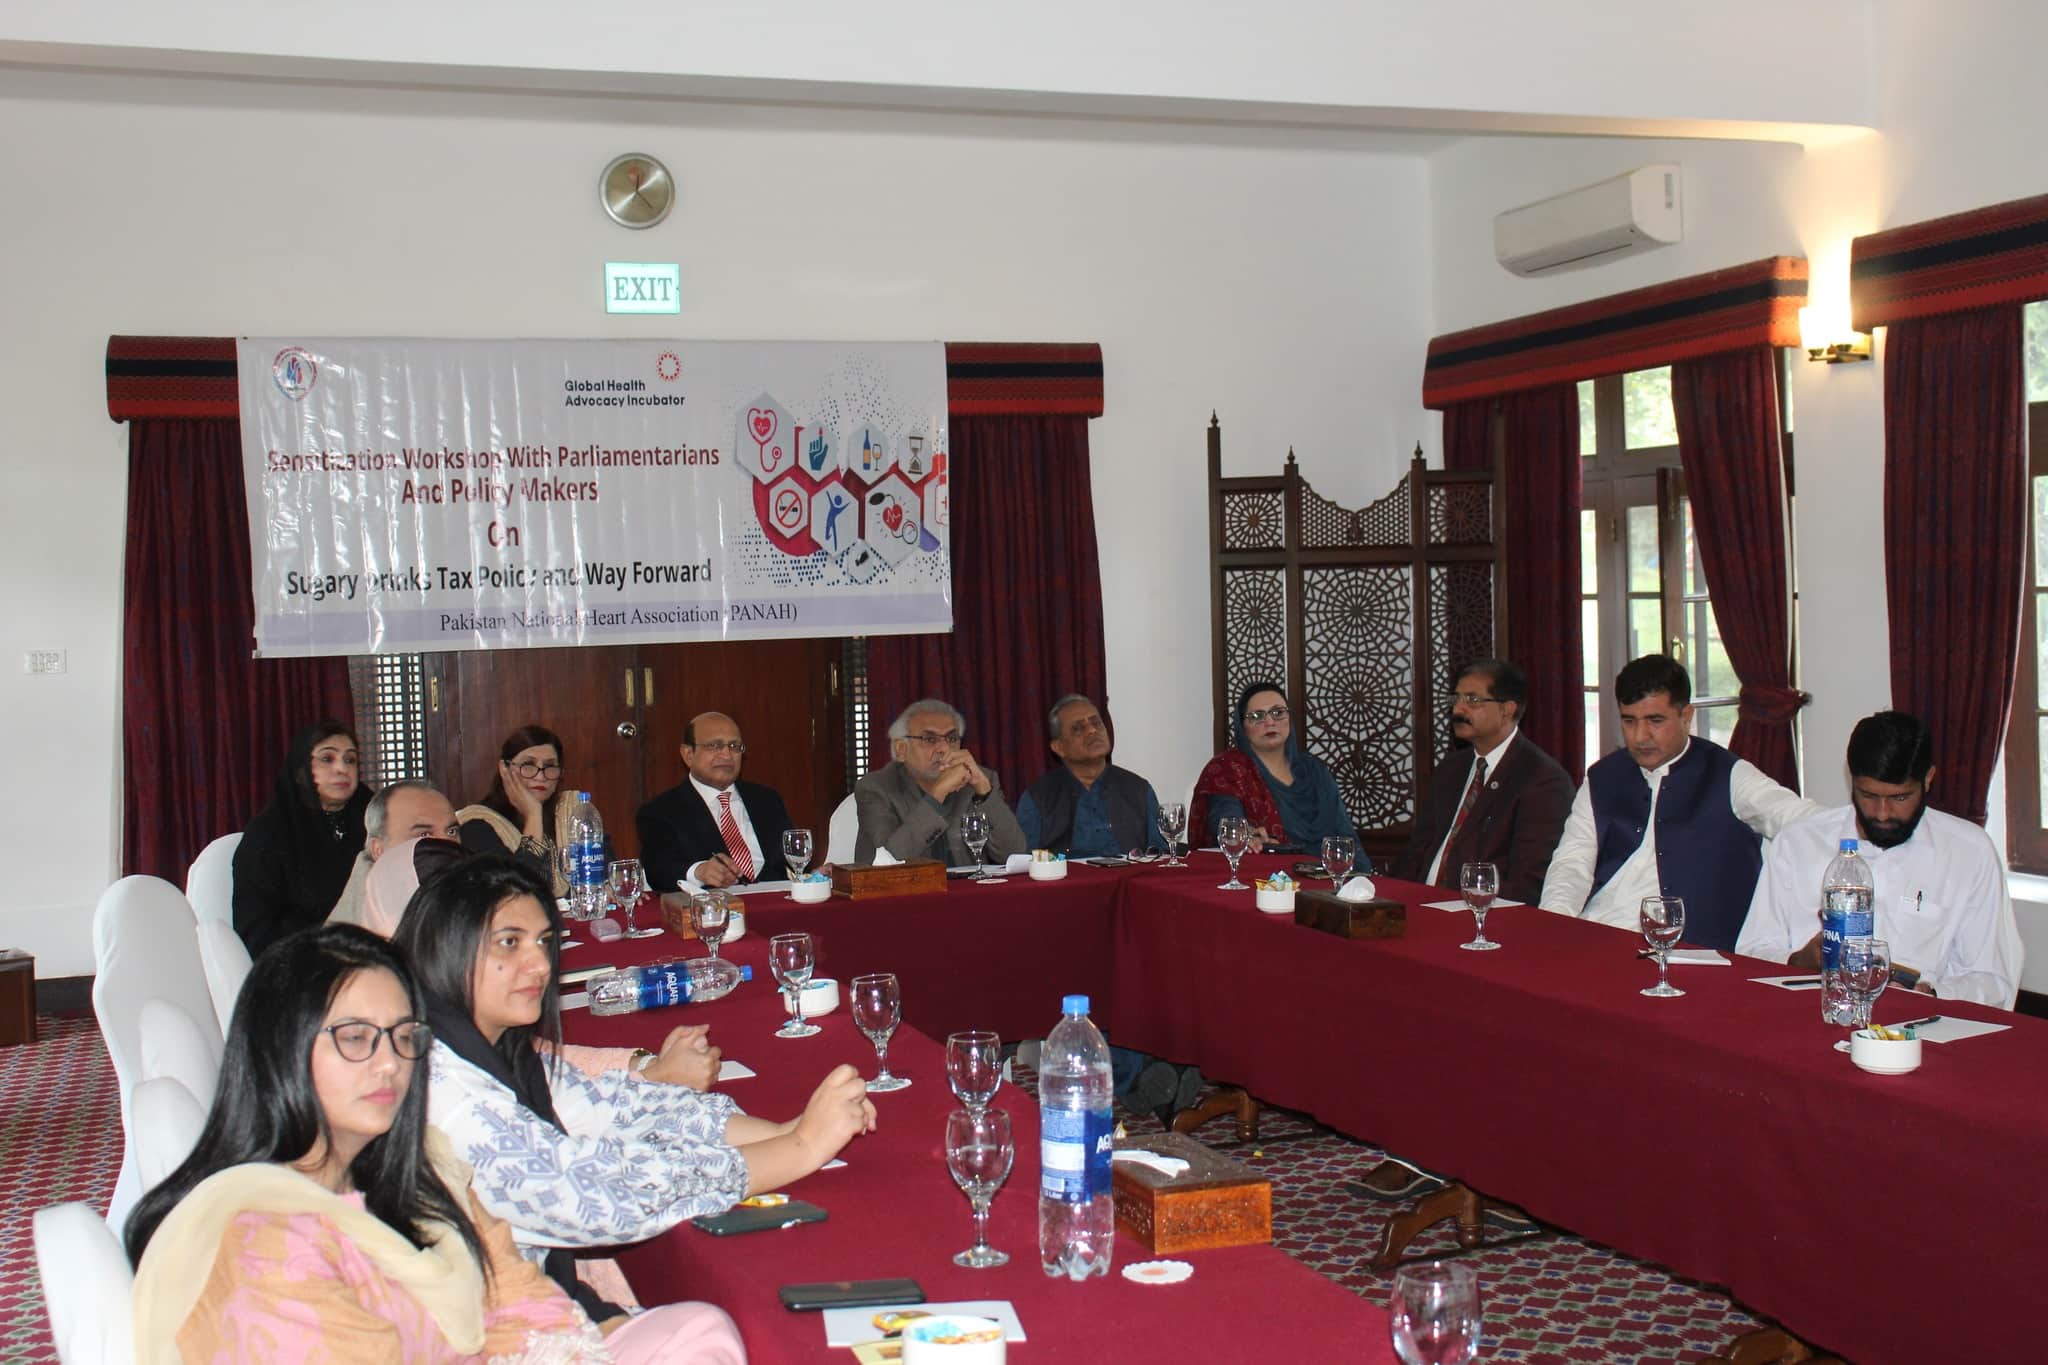 Panah Organized an Sensitization workshop with Parliamentarians and Policy Makers on Sugary Drinks Tax Policy And Way Forward. Venue : Swat Serena Hotel